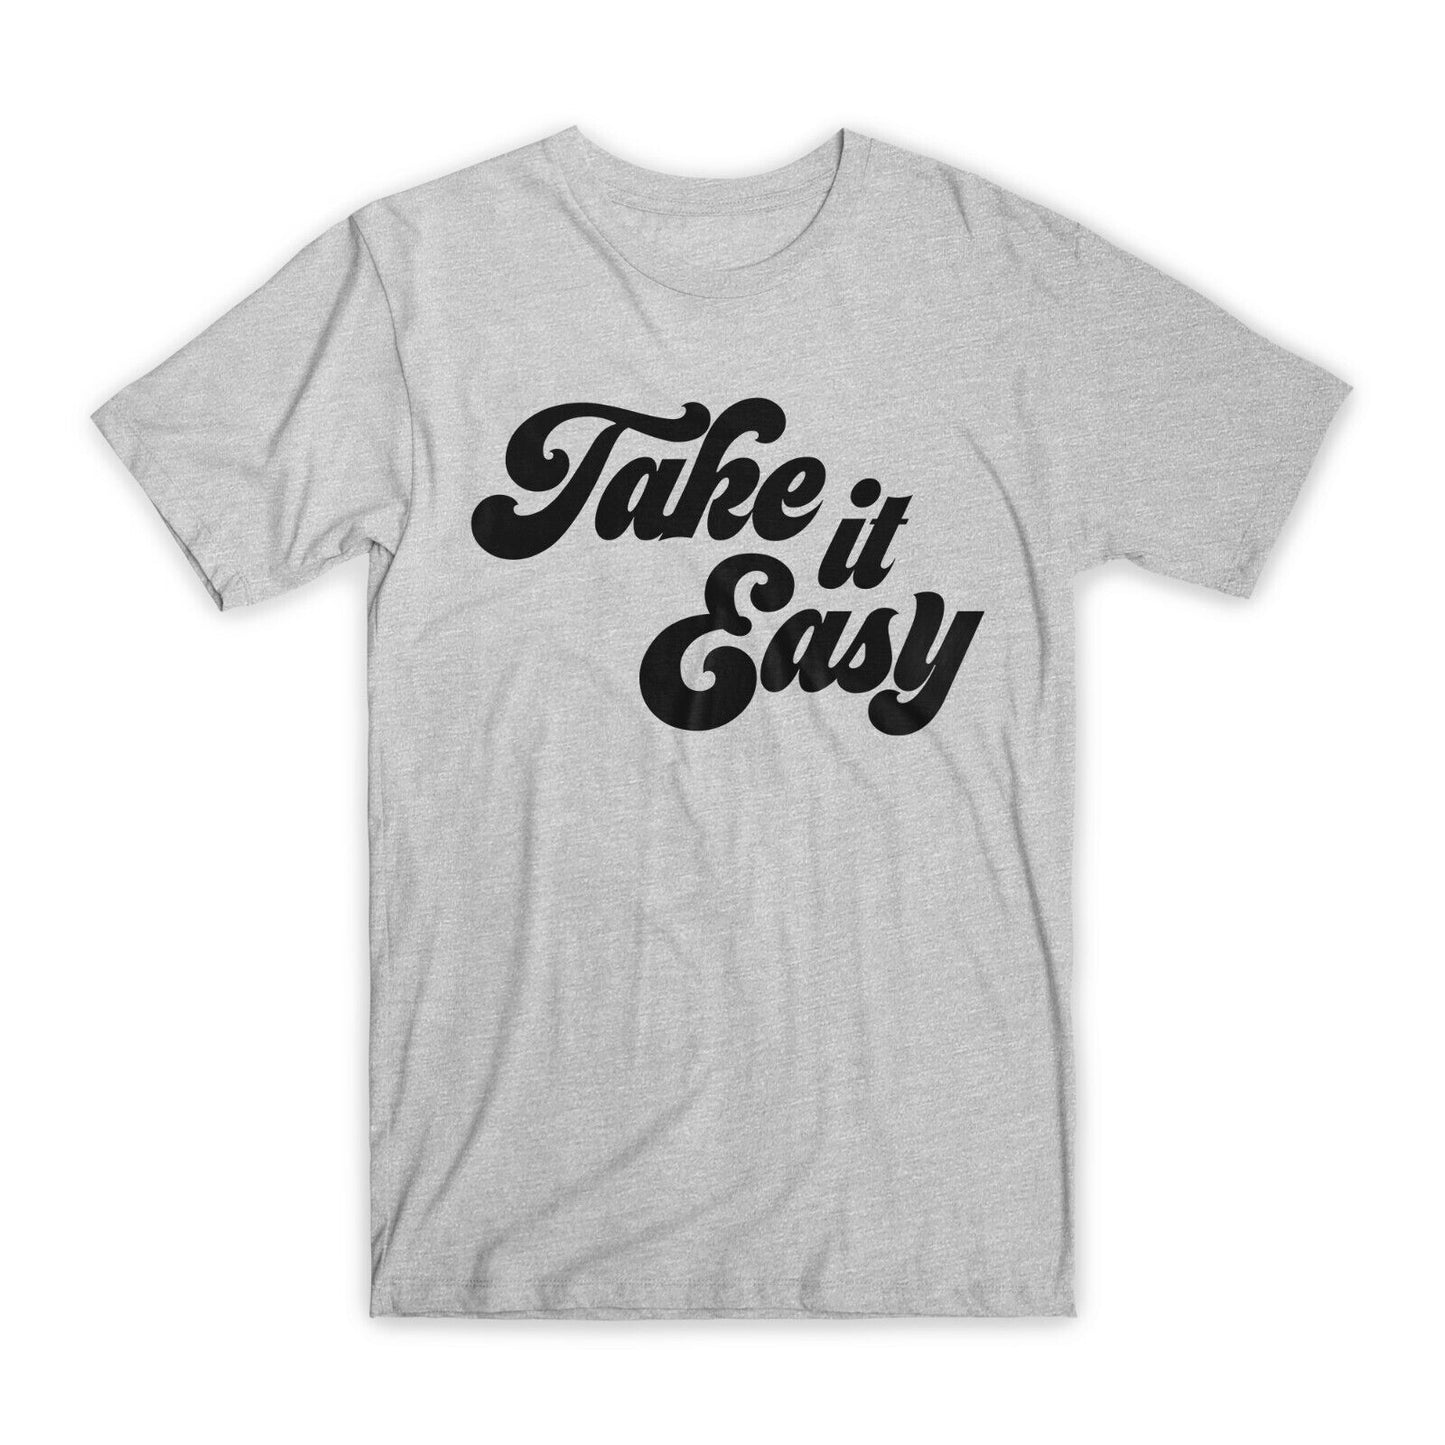 Take It Easy T-Shirt Premium Soft Cotton Crew Neck Funny Tees Novelty Gifts NEW